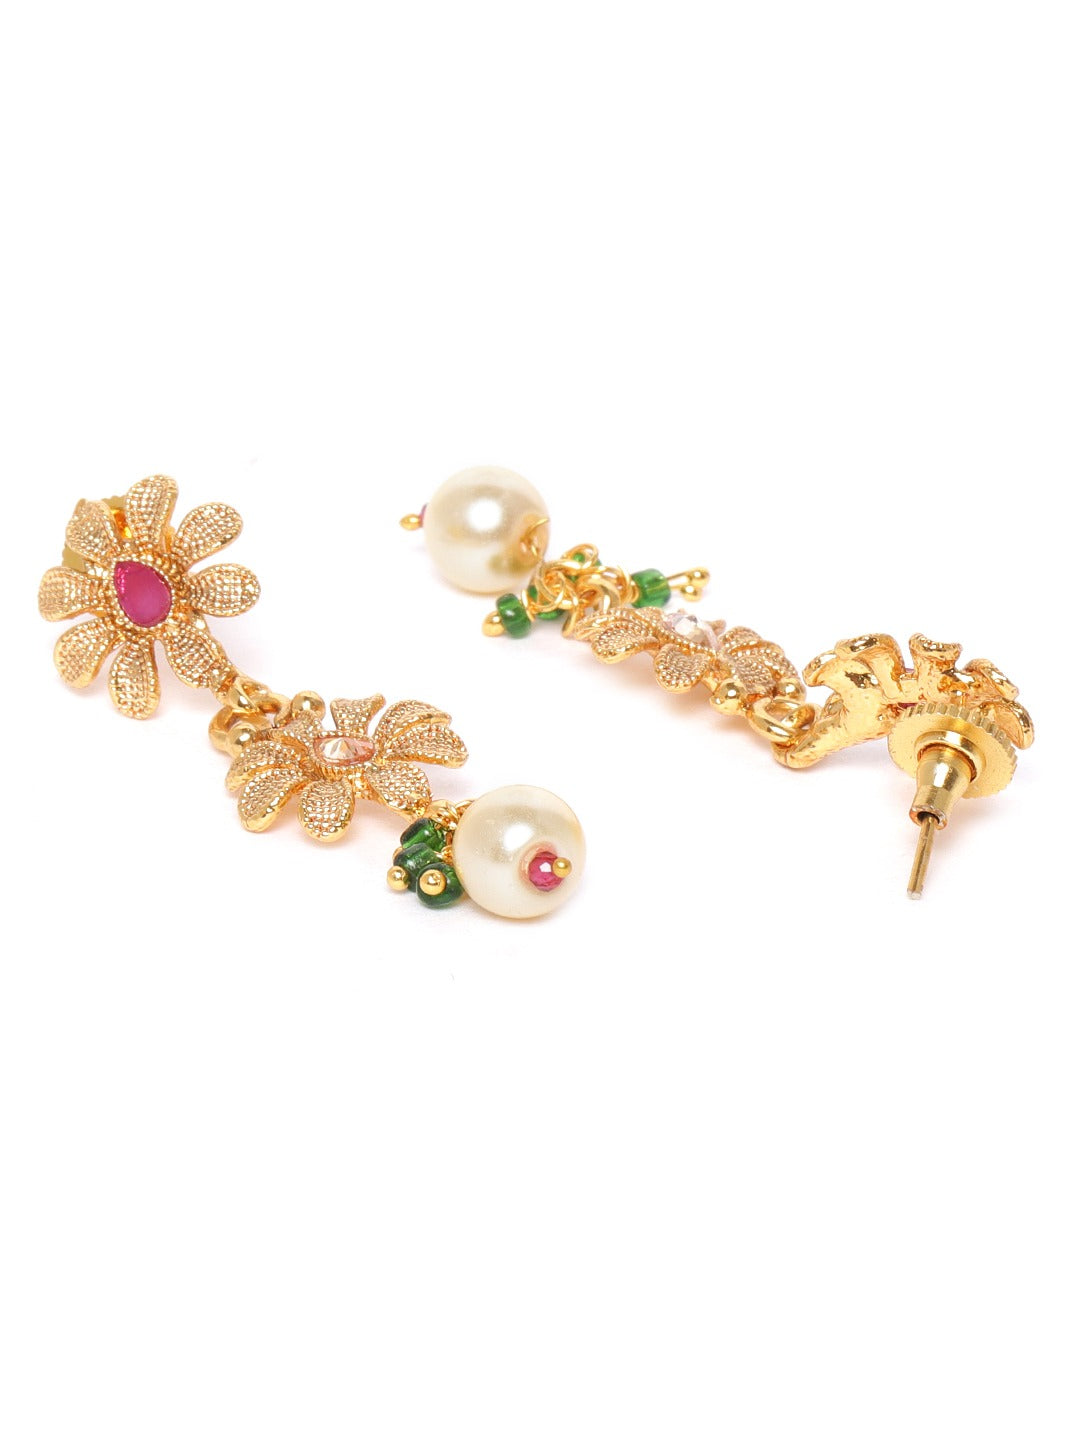 Ruby Emerald Stones Pearls Gold Plated Floral Jewellery Set